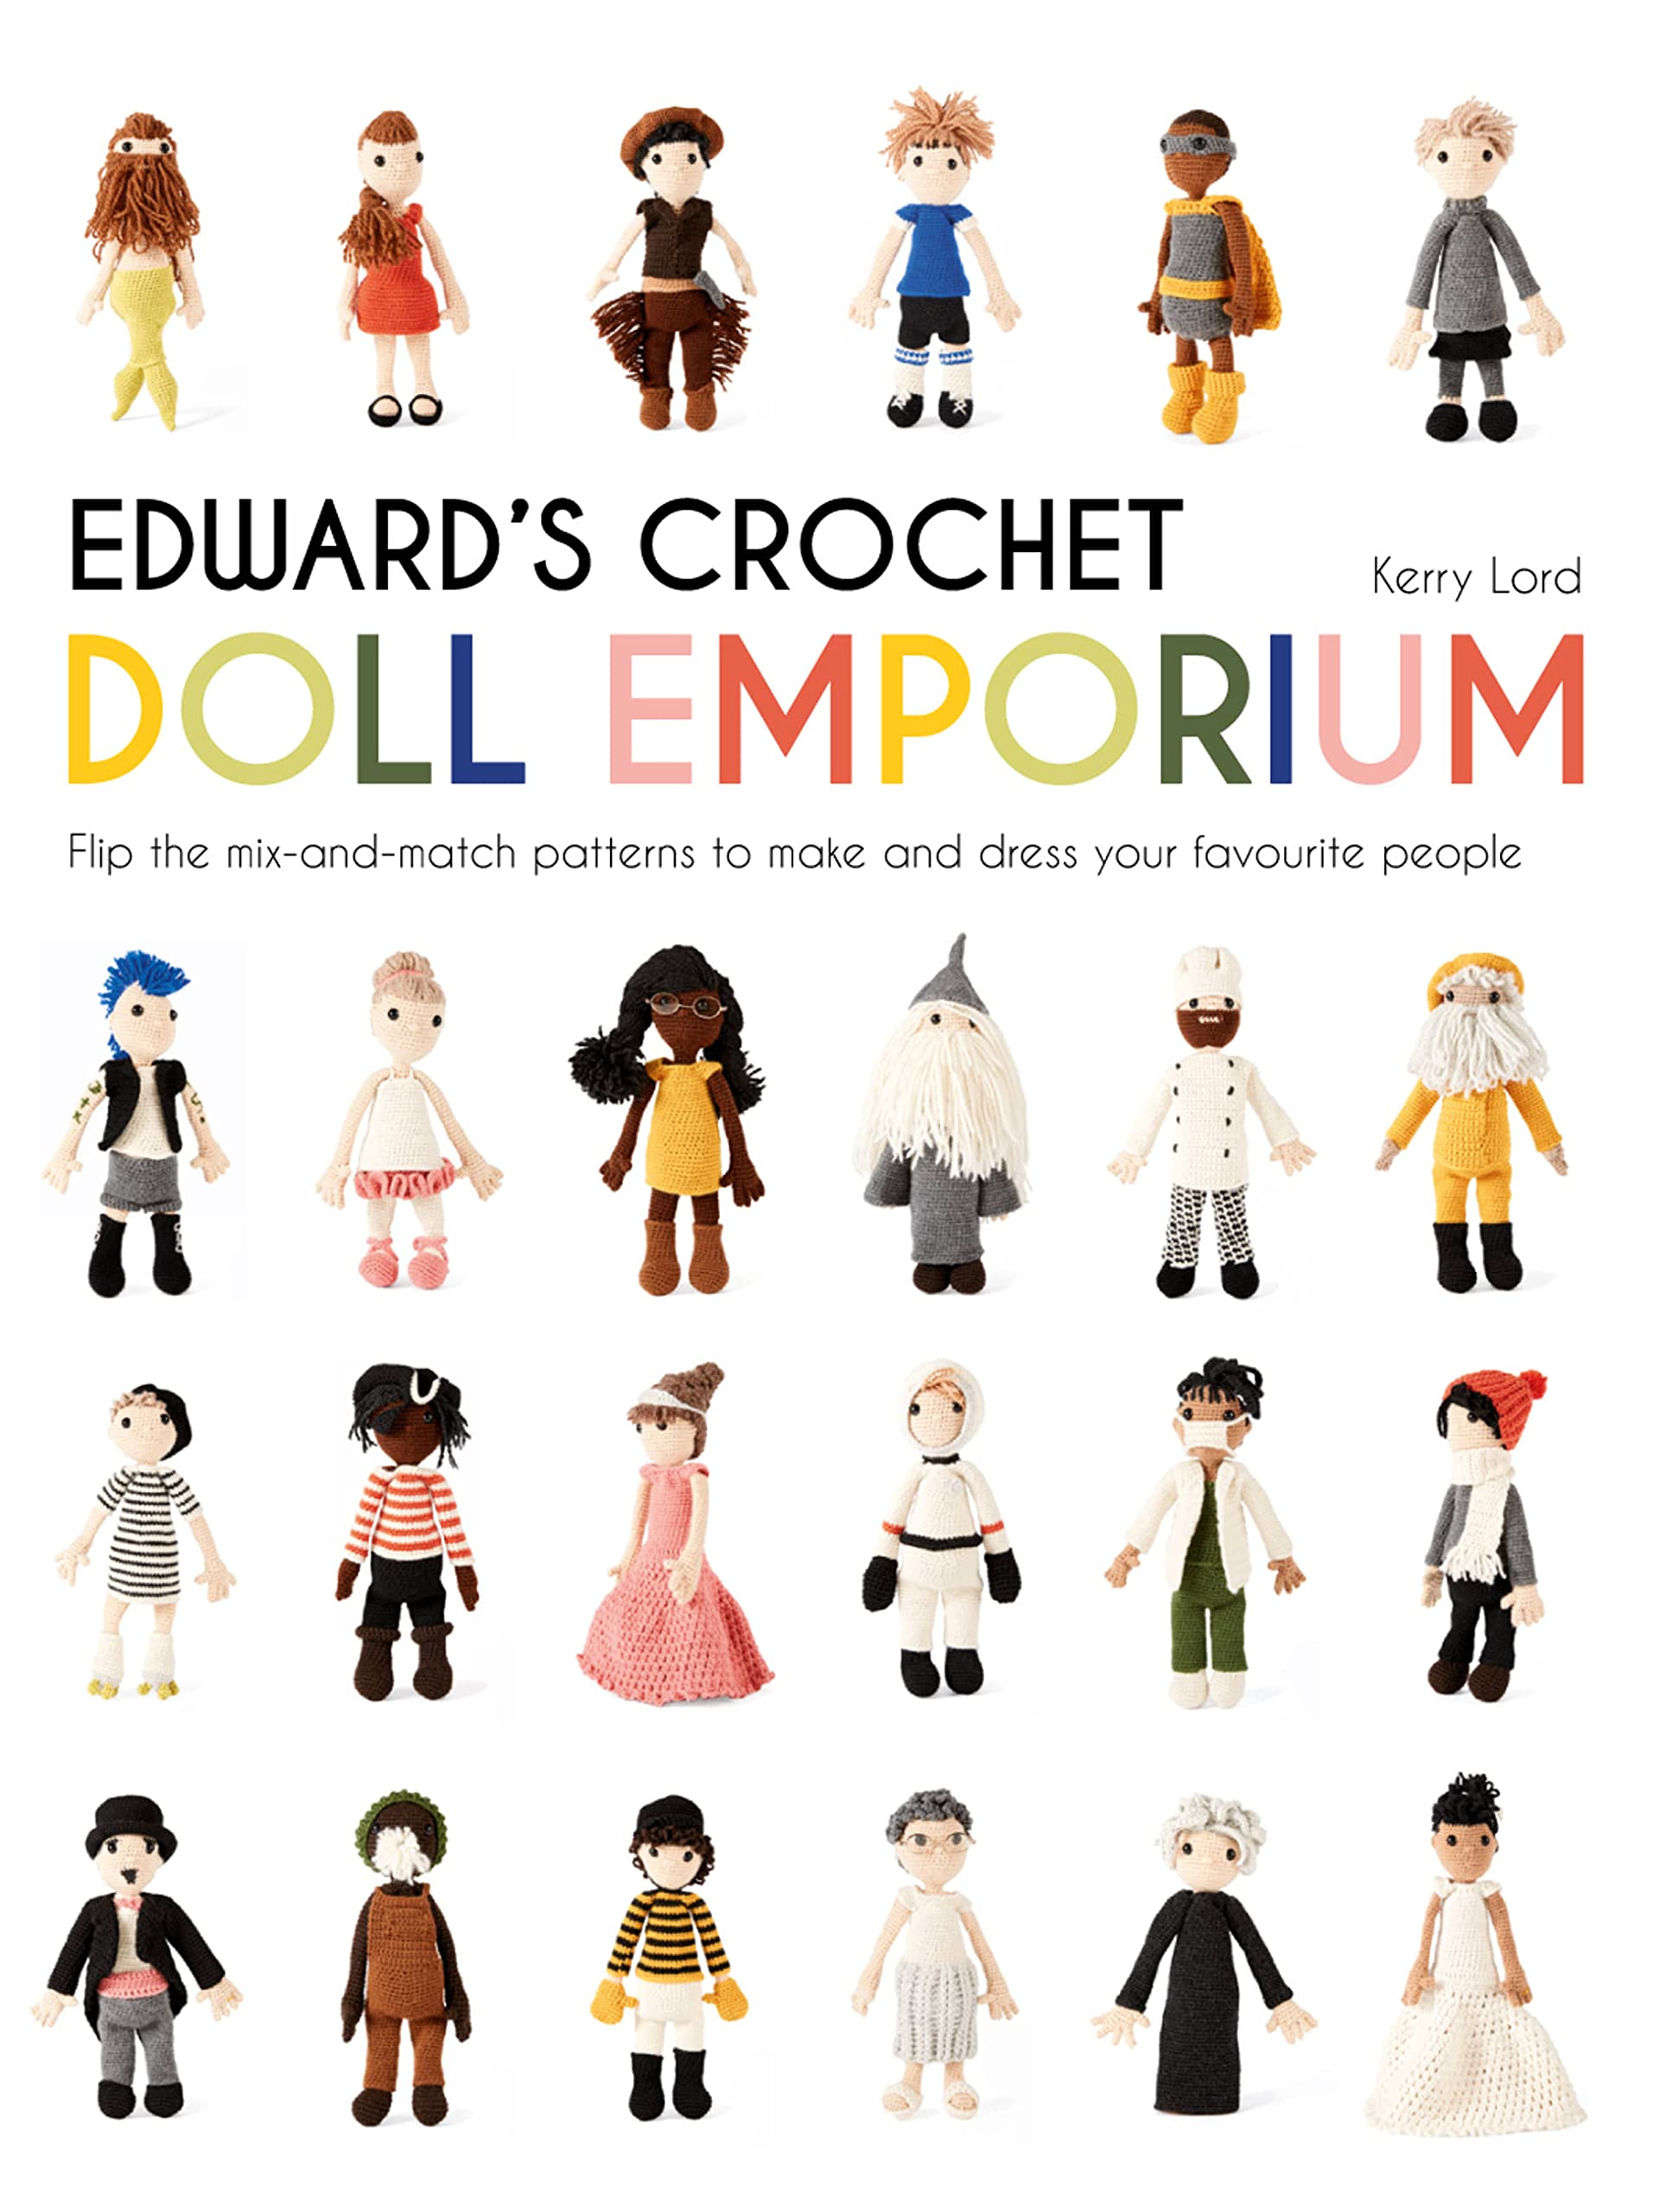 Edward's Crochet Doll Emporium: Flip the mix-and-match patterns to make (Needlework) - Lets Buy Books